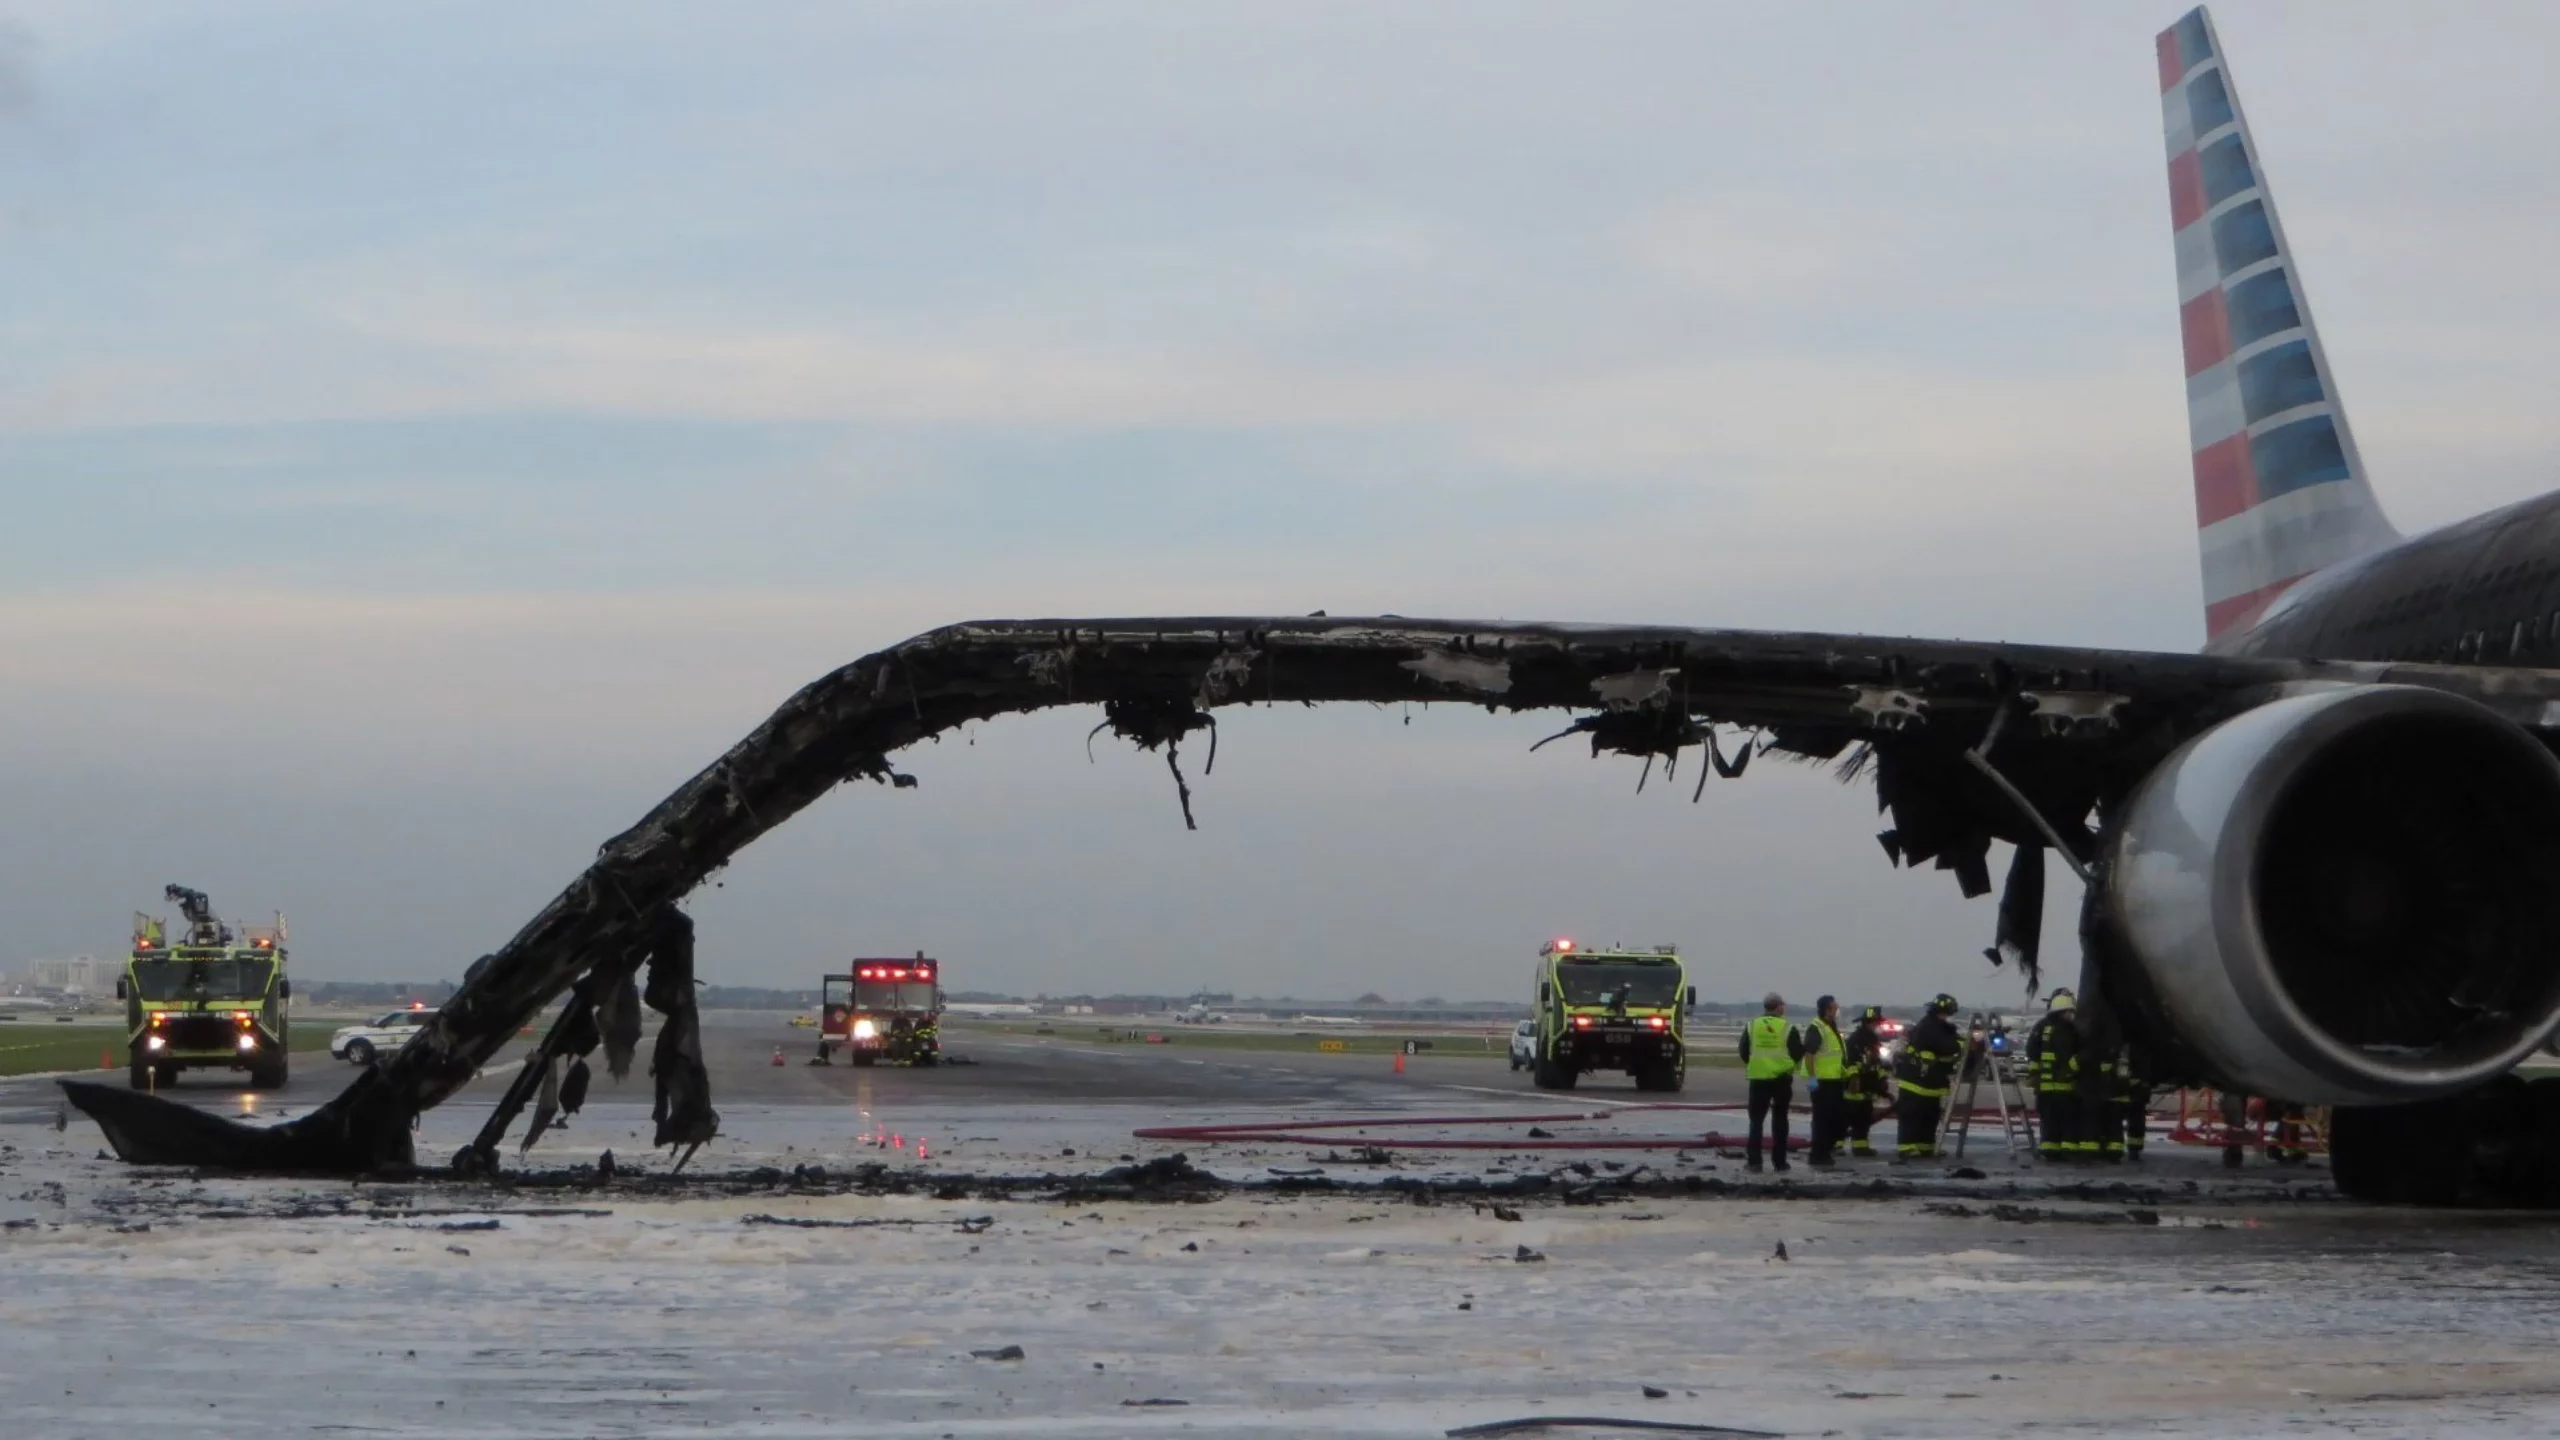 The aftermath of a 2016 fire on a runway at O’Hare Airport. A firefighting foam with a toxic chemical was used to douse flames from the American Airlines plane.